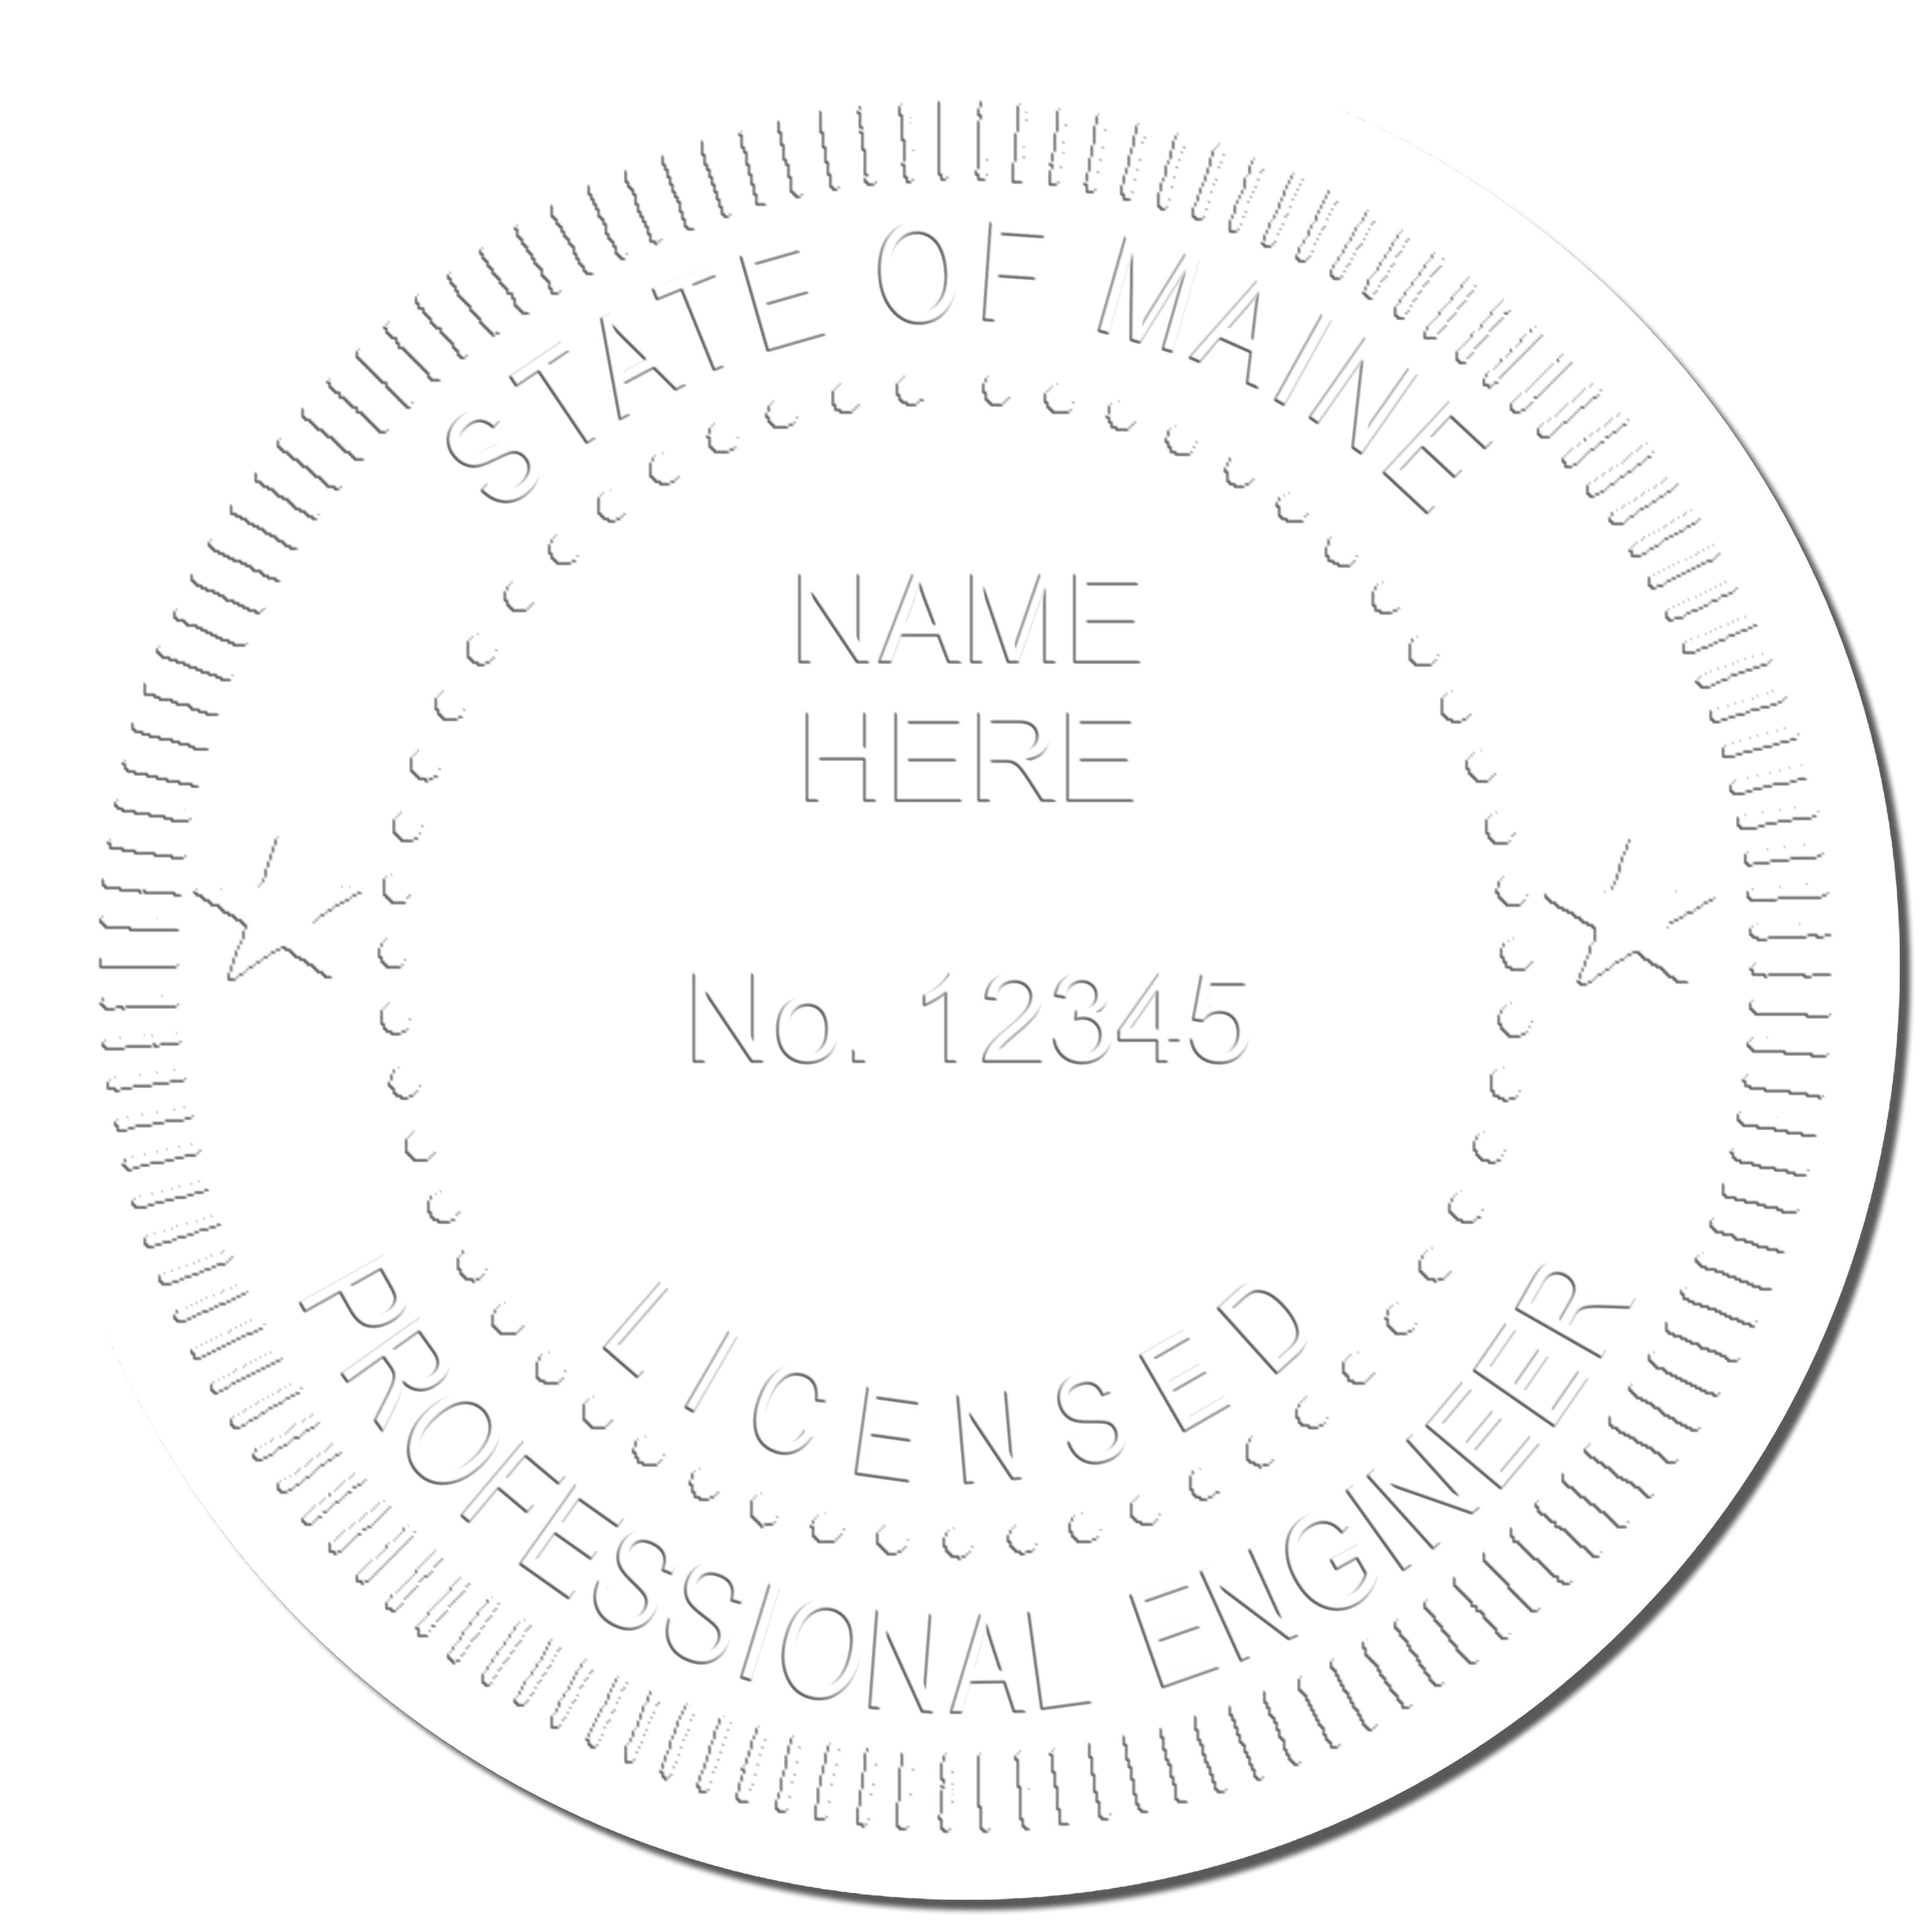 This paper is stamped with a sample imprint of the Hybrid Maine Engineer Seal, signifying its quality and reliability.